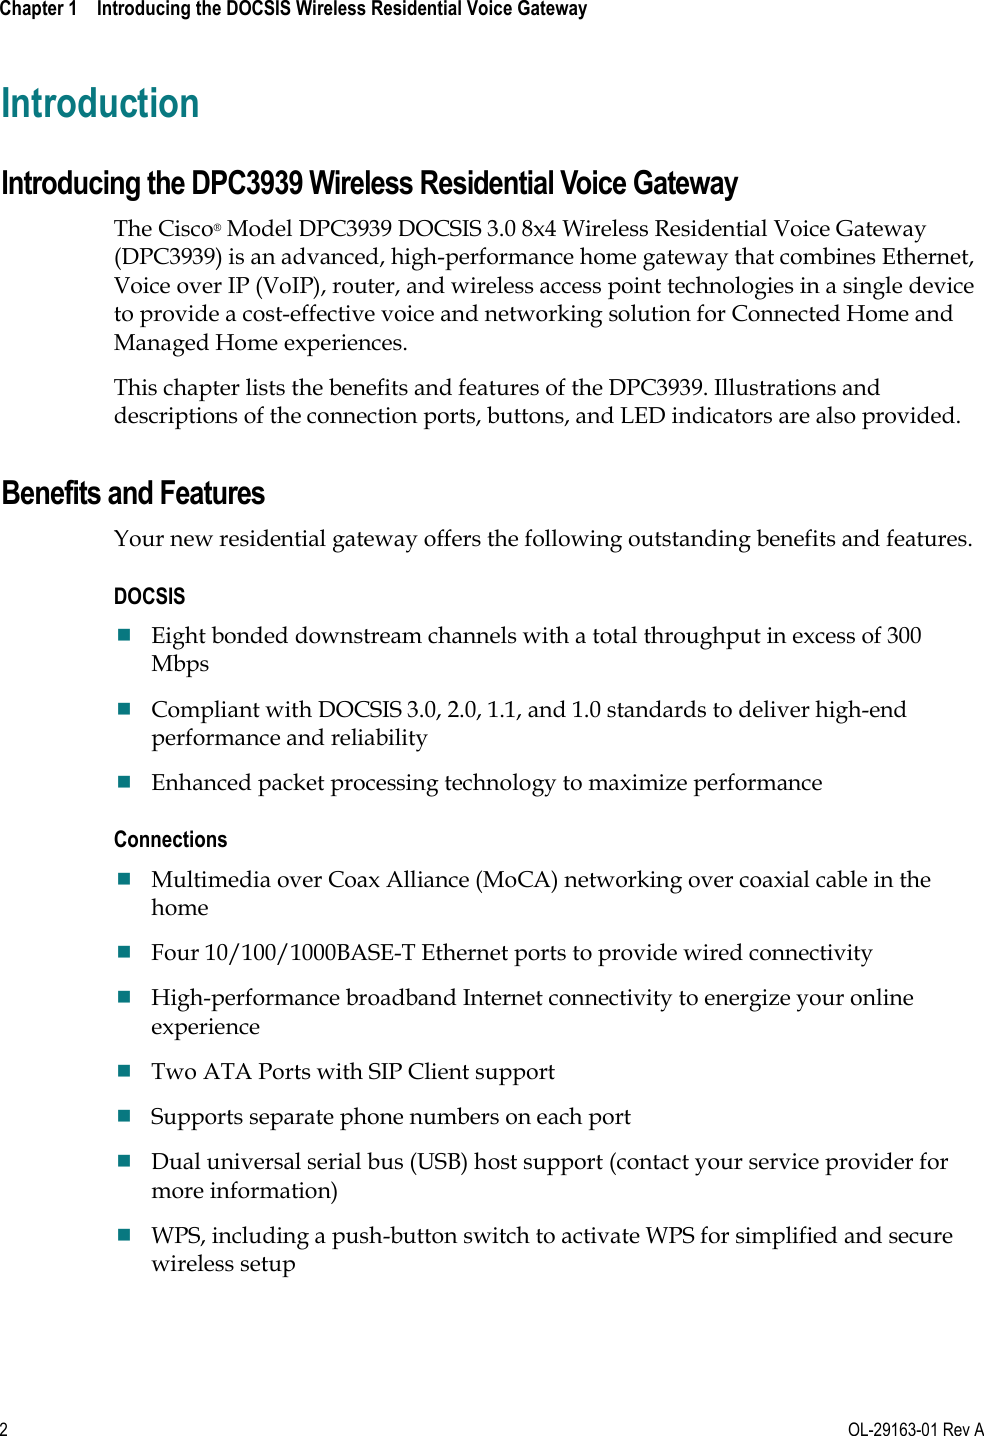  Chapter 1    Introducing the DOCSIS Wireless Residential Voice Gateway     2  OL-29163-01 Rev A Introduction Introducing the DPC3939 Wireless Residential Voice Gateway The Cisco® Model DPC3939 DOCSIS 3.0 8x4 Wireless Residential Voice Gateway (DPC3939) is an advanced, high-performance home gateway that combines Ethernet, Voice over IP (VoIP), router, and wireless access point technologies in a single device to provide a cost-effective voice and networking solution for Connected Home and Managed Home experiences. This chapter lists the benefits and features of the DPC3939. Illustrations and descriptions of the connection ports, buttons, and LED indicators are also provided.  Benefits and Features Your new residential gateway offers the following outstanding benefits and features. DOCSIS  Eight bonded downstream channels with a total throughput in excess of 300 Mbps  Compliant with DOCSIS 3.0, 2.0, 1.1, and 1.0 standards to deliver high-end performance and reliability  Enhanced packet processing technology to maximize performance Connections  Multimedia over Coax Alliance (MoCA) networking over coaxial cable in the home  Four 10/100/1000BASE-T Ethernet ports to provide wired connectivity  High-performance broadband Internet connectivity to energize your online experience  Two ATA Ports with SIP Client support   Supports separate phone numbers on each port  Dual universal serial bus (USB) host support (contact your service provider for more information)  WPS, including a push-button switch to activate WPS for simplified and secure wireless setup 